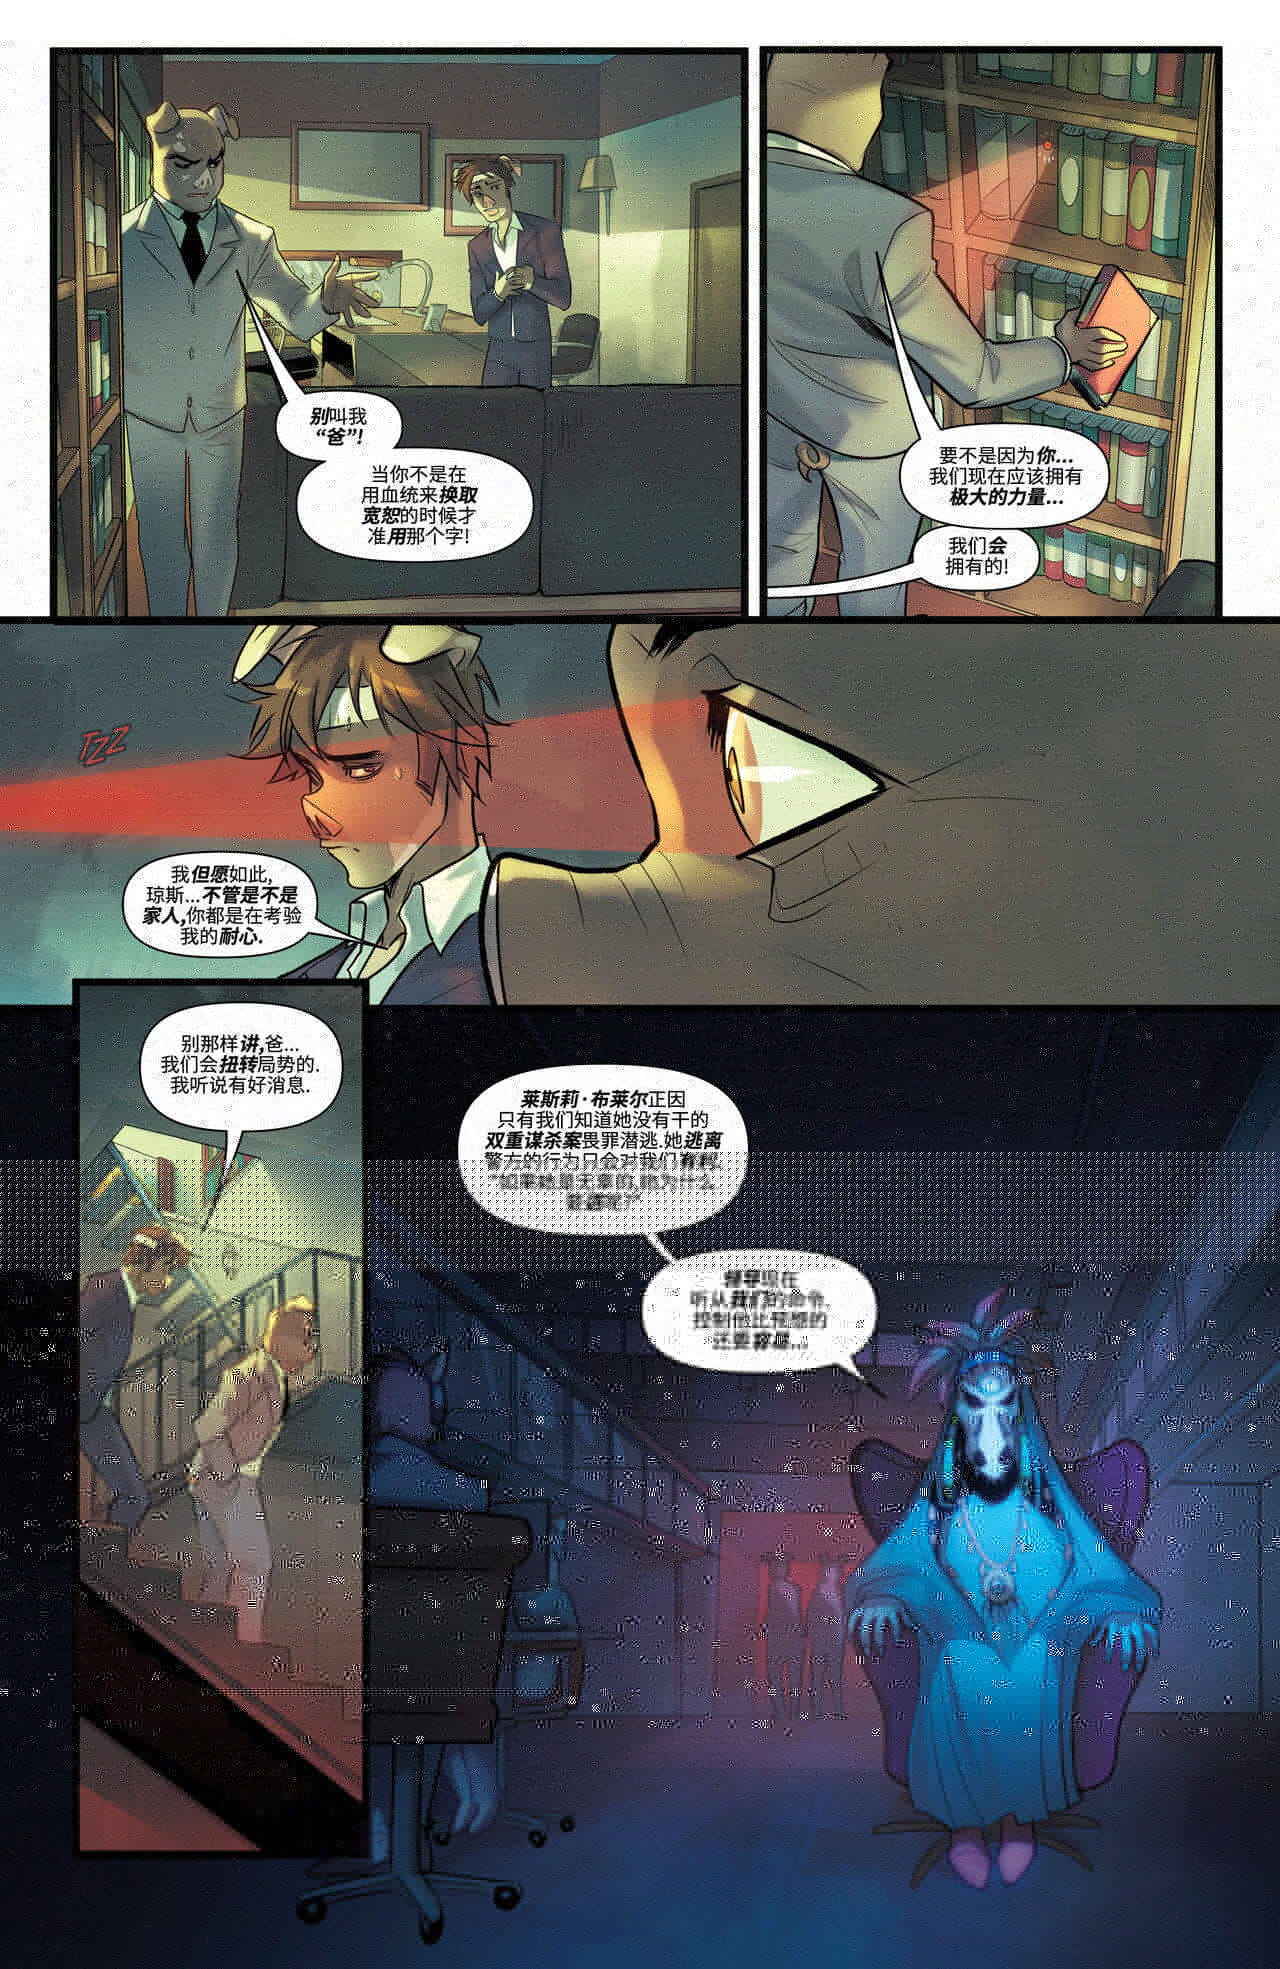 Unnatural - 反自然 - Issue 6 page 1